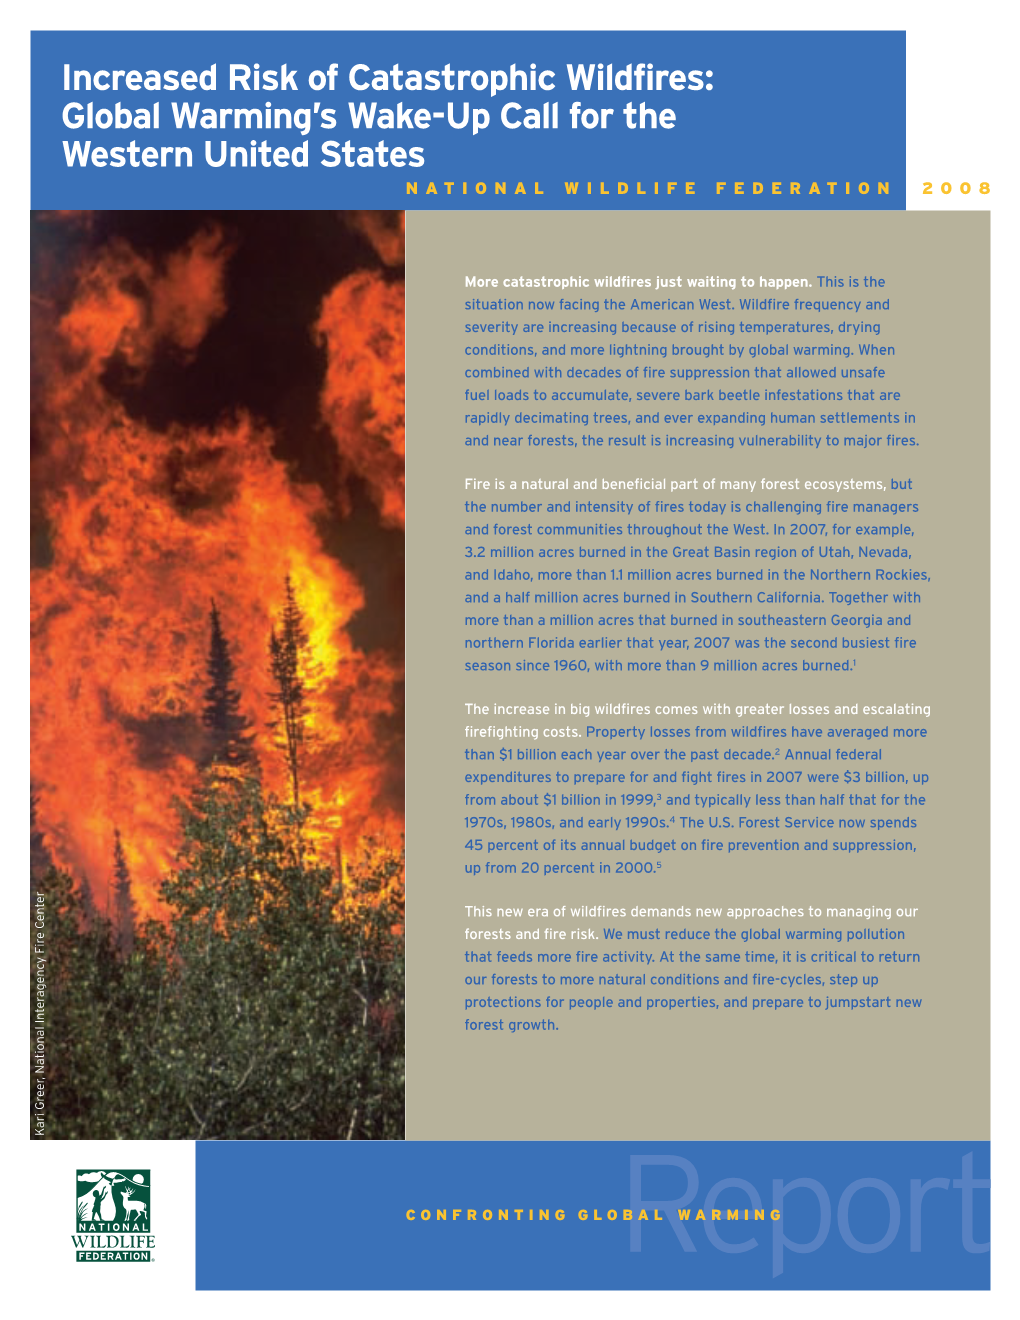 Increased Risk of Catastrophic Wildfires: Global Warming's Wake